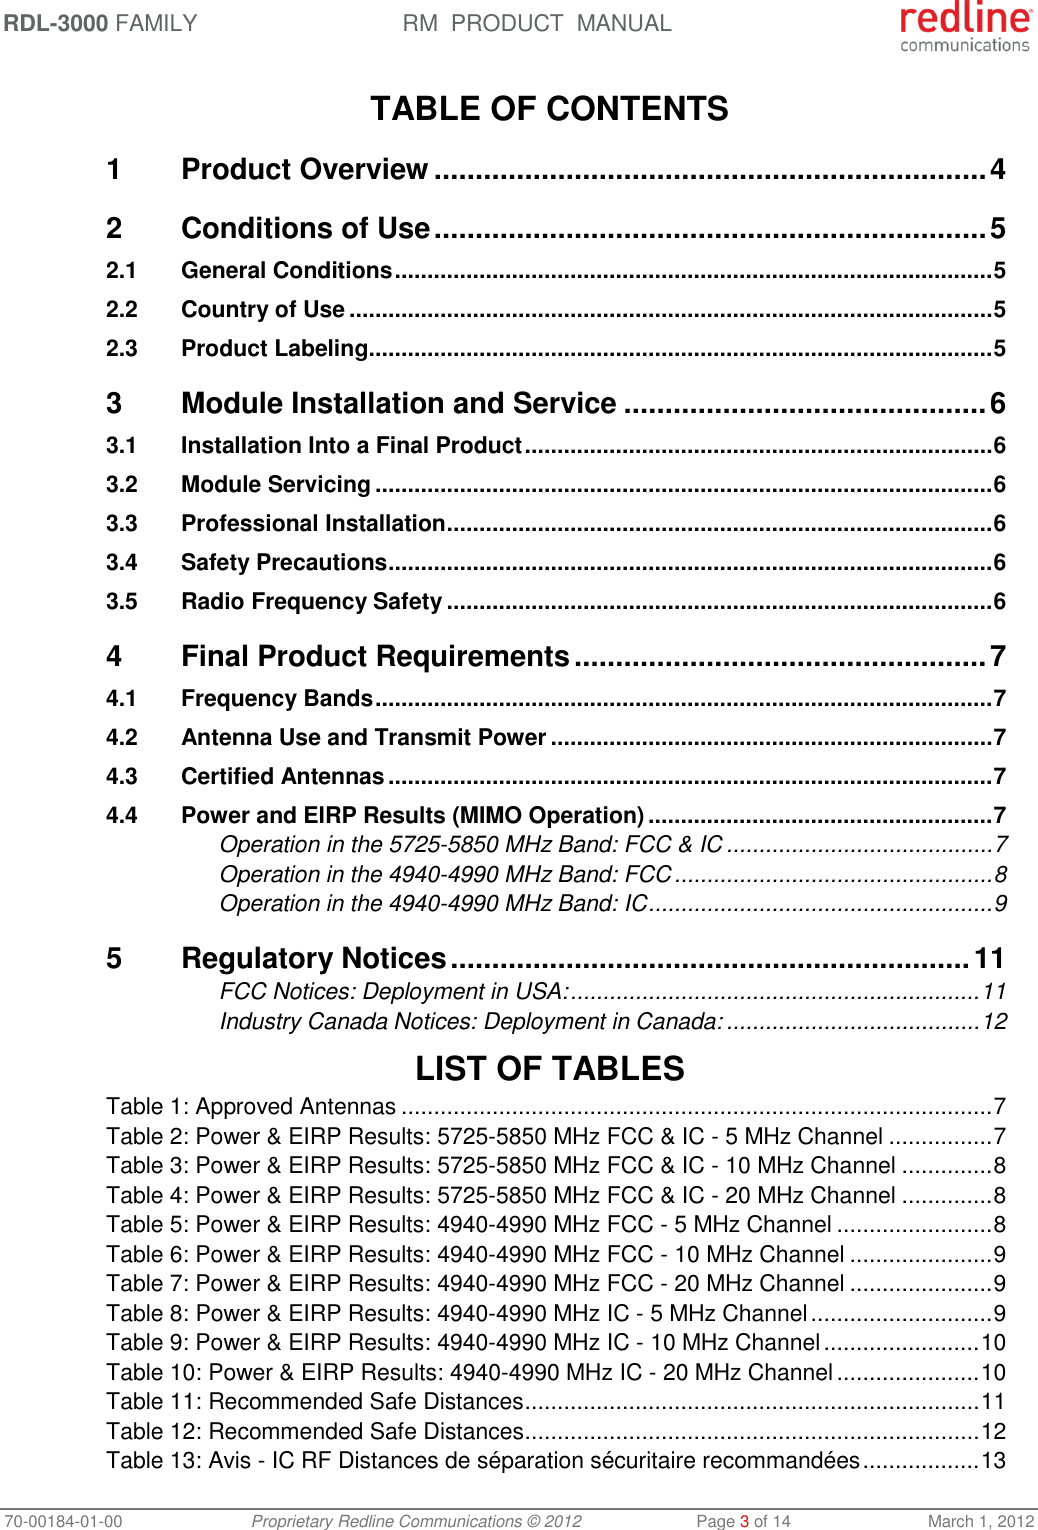 RDL-3000 FAMILY RM  PRODUCT  MANUAL 70-00184-01-00 Proprietary Redline Communications © 2012  Page 3 of 14  March 1, 2012  TABLE OF CONTENTS 1 Product Overview ................................................................... 4 2 Conditions of Use ................................................................... 5 2.1 General Conditions ............................................................................................ 5 2.2 Country of Use ................................................................................................... 5 2.3 Product Labeling ................................................................................................ 5 3 Module Installation and Service ............................................ 6 3.1 Installation Into a Final Product ........................................................................ 6 3.2 Module Servicing ............................................................................................... 6 3.3 Professional Installation .................................................................................... 6 3.4 Safety Precautions ............................................................................................. 6 3.5 Radio Frequency Safety .................................................................................... 6 4 Final Product Requirements .................................................. 7 4.1 Frequency Bands ............................................................................................... 7 4.2 Antenna Use and Transmit Power .................................................................... 7 4.3 Certified Antennas ............................................................................................. 7 4.4 Power and EIRP Results (MIMO Operation) ..................................................... 7 Operation in the 5725-5850 MHz Band: FCC &amp; IC ......................................... 7 Operation in the 4940-4990 MHz Band: FCC ................................................. 8 Operation in the 4940-4990 MHz Band: IC ..................................................... 9 5 Regulatory Notices ............................................................... 11 FCC Notices: Deployment in USA: ............................................................... 11 Industry Canada Notices: Deployment in Canada: ....................................... 12  LIST OF TABLES Table 1: Approved Antennas ........................................................................................... 7 Table 2: Power &amp; EIRP Results: 5725-5850 MHz FCC &amp; IC - 5 MHz Channel ................ 7 Table 3: Power &amp; EIRP Results: 5725-5850 MHz FCC &amp; IC - 10 MHz Channel .............. 8 Table 4: Power &amp; EIRP Results: 5725-5850 MHz FCC &amp; IC - 20 MHz Channel .............. 8 Table 5: Power &amp; EIRP Results: 4940-4990 MHz FCC - 5 MHz Channel ........................ 8 Table 6: Power &amp; EIRP Results: 4940-4990 MHz FCC - 10 MHz Channel ...................... 9 Table 7: Power &amp; EIRP Results: 4940-4990 MHz FCC - 20 MHz Channel ...................... 9 Table 8: Power &amp; EIRP Results: 4940-4990 MHz IC - 5 MHz Channel ............................ 9 Table 9: Power &amp; EIRP Results: 4940-4990 MHz IC - 10 MHz Channel ........................ 10 Table 10: Power &amp; EIRP Results: 4940-4990 MHz IC - 20 MHz Channel ...................... 10 Table 11: Recommended Safe Distances ...................................................................... 11 Table 12: Recommended Safe Distances ...................................................................... 12 Table 13: Avis - IC RF Distances de séparation sécuritaire recommandées .................. 13 